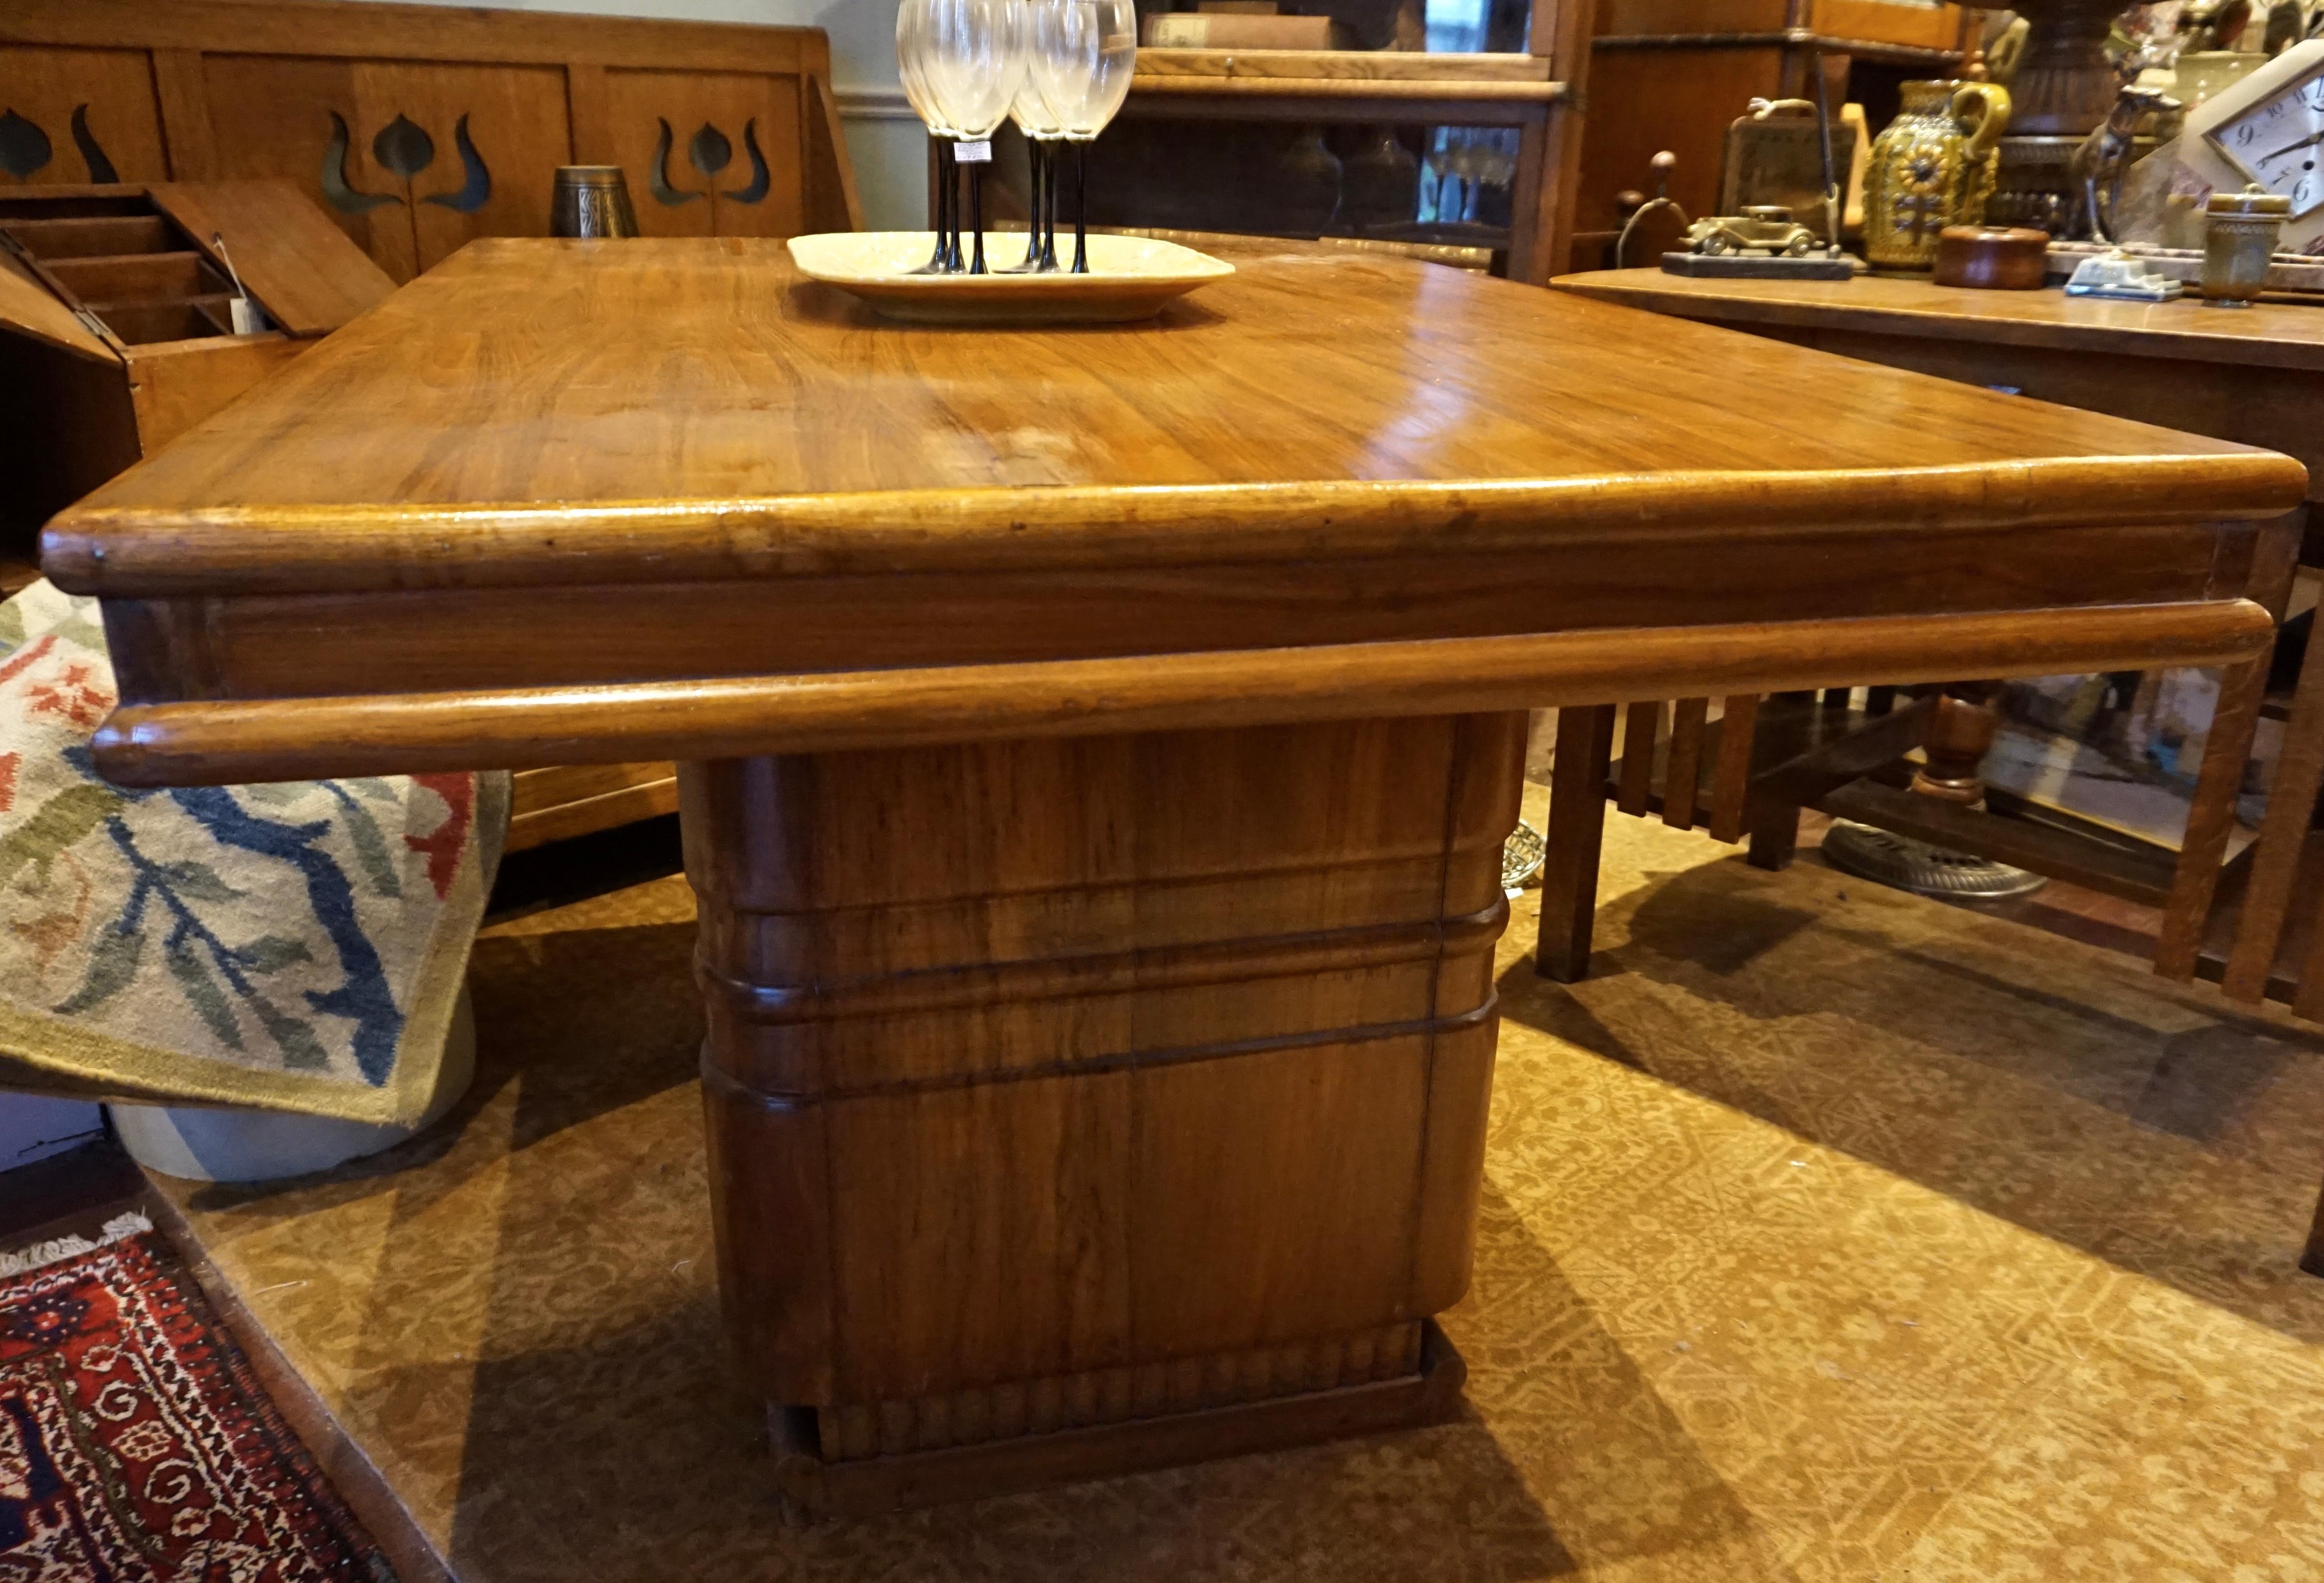 Solid teak dining table from the Deco era with a beautiful veneer top showing free flowing honey grain. The table top sits on two broad legs that resemble steamship chimneys from the era. Latch mechanism secures top to legs. Handsome and versatile.